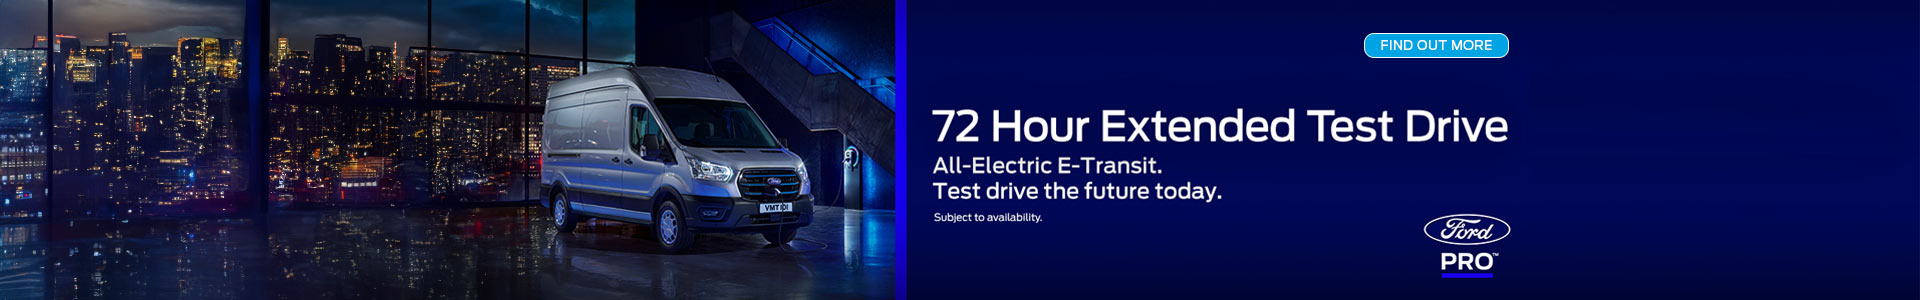 Ford E-Transit 72 Hour Extended Test Drive This Spring